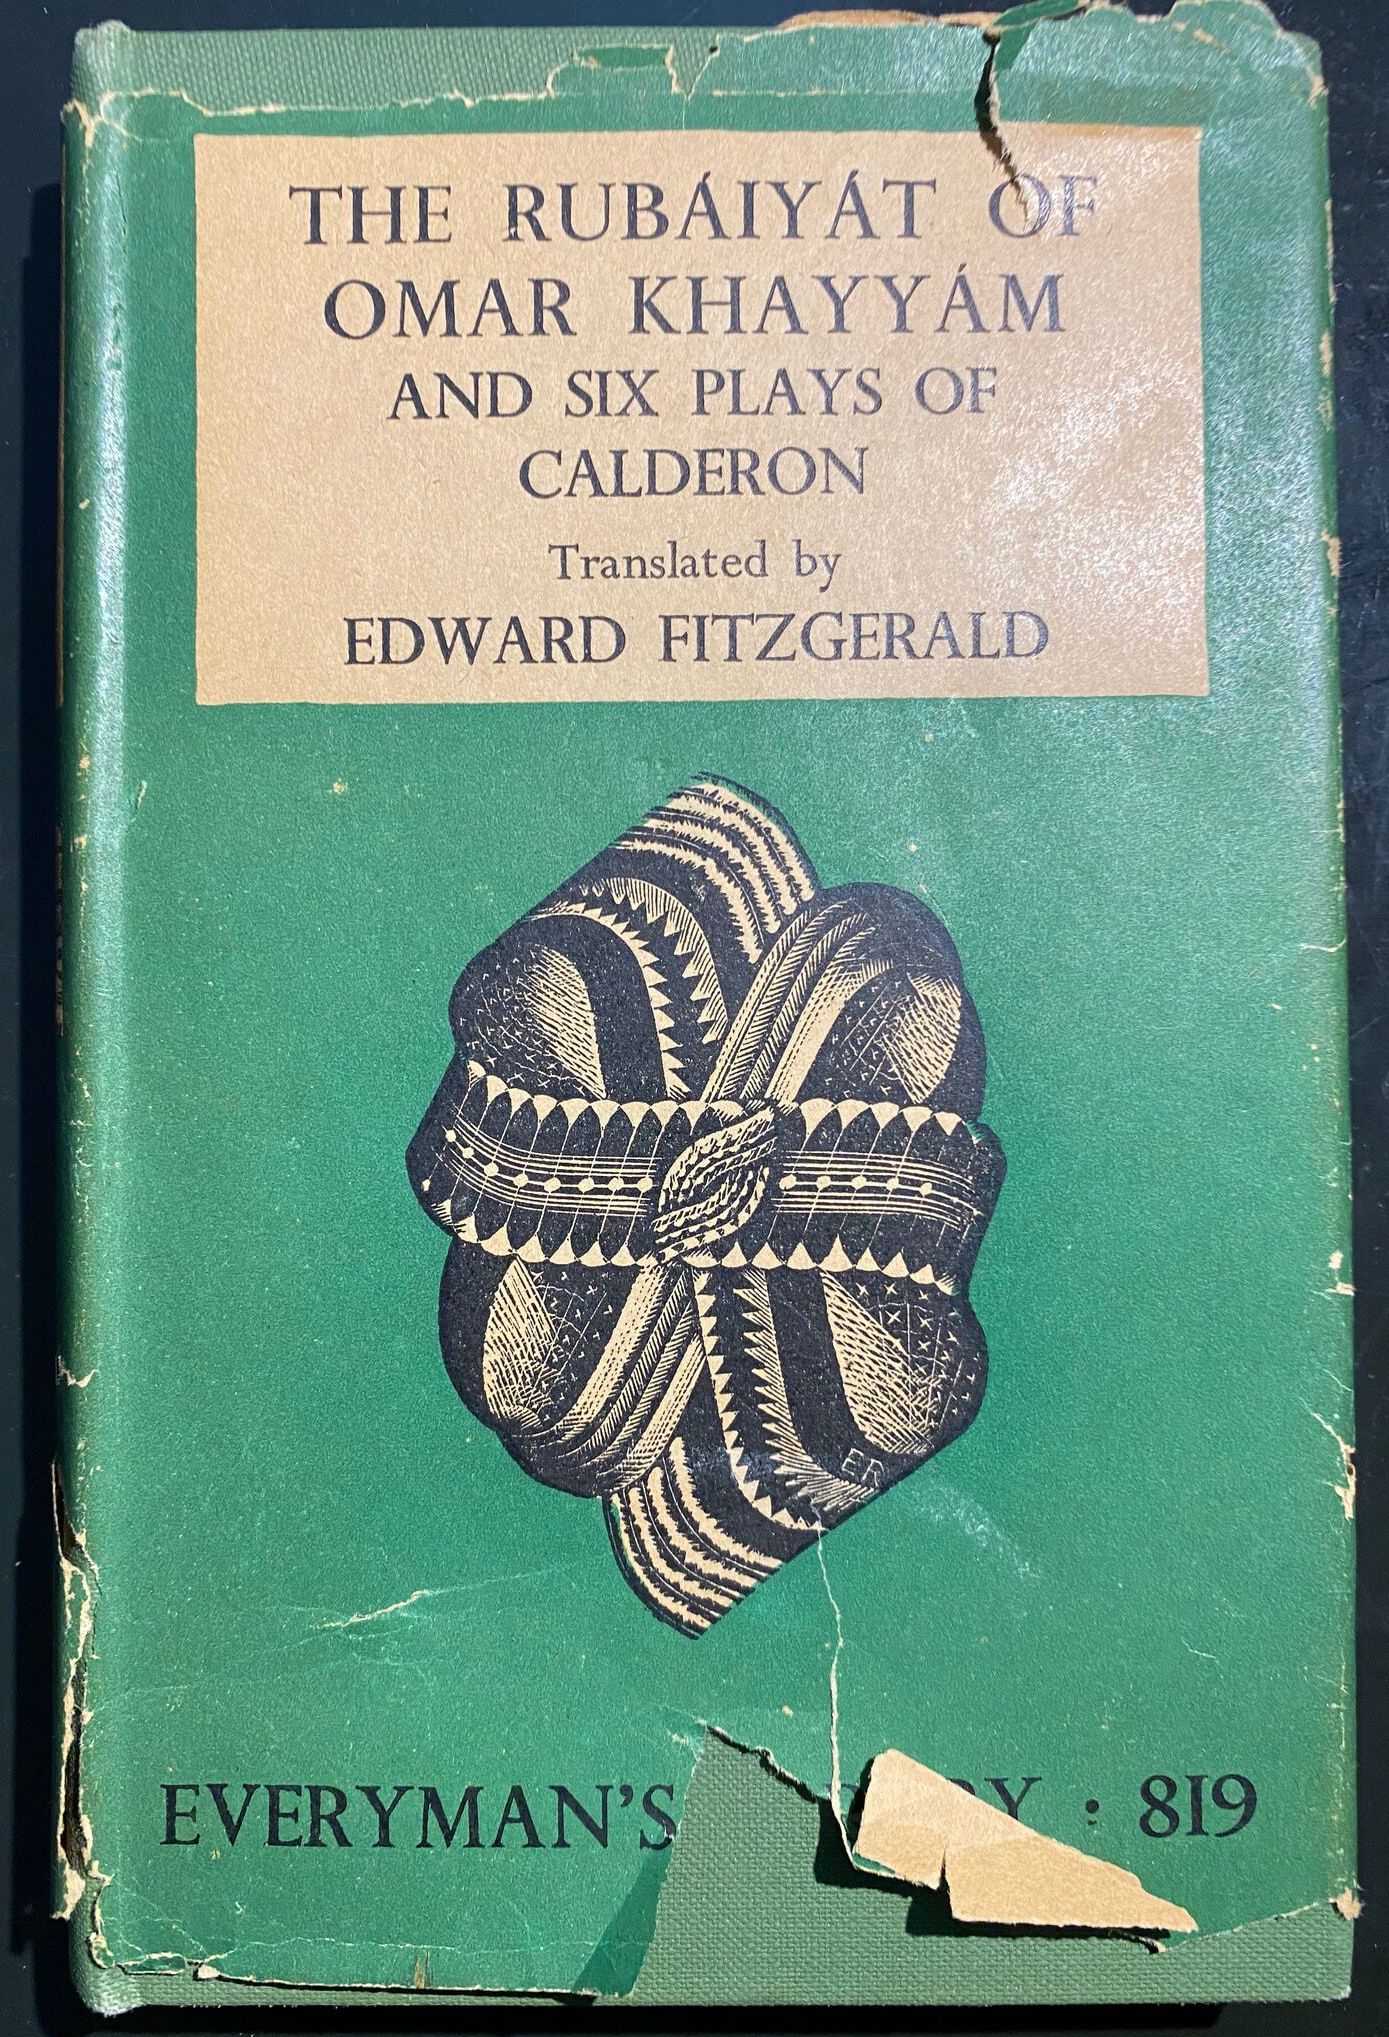 1948 Everyman's Library Edition with Six Plays of Calderon